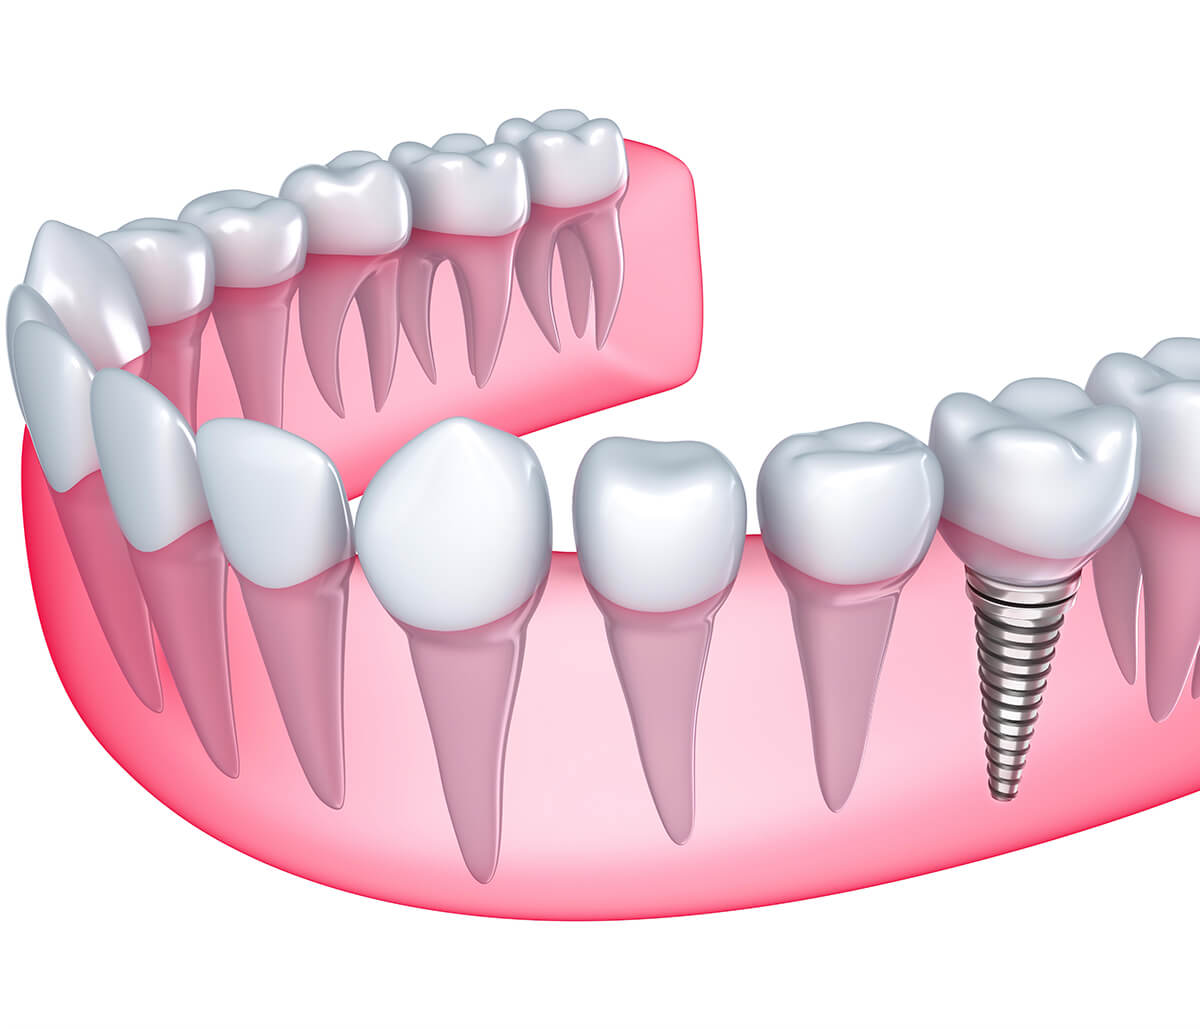 Dental Implants 101: All You Need to Know About Dental Implants Treatment in New Hampshire